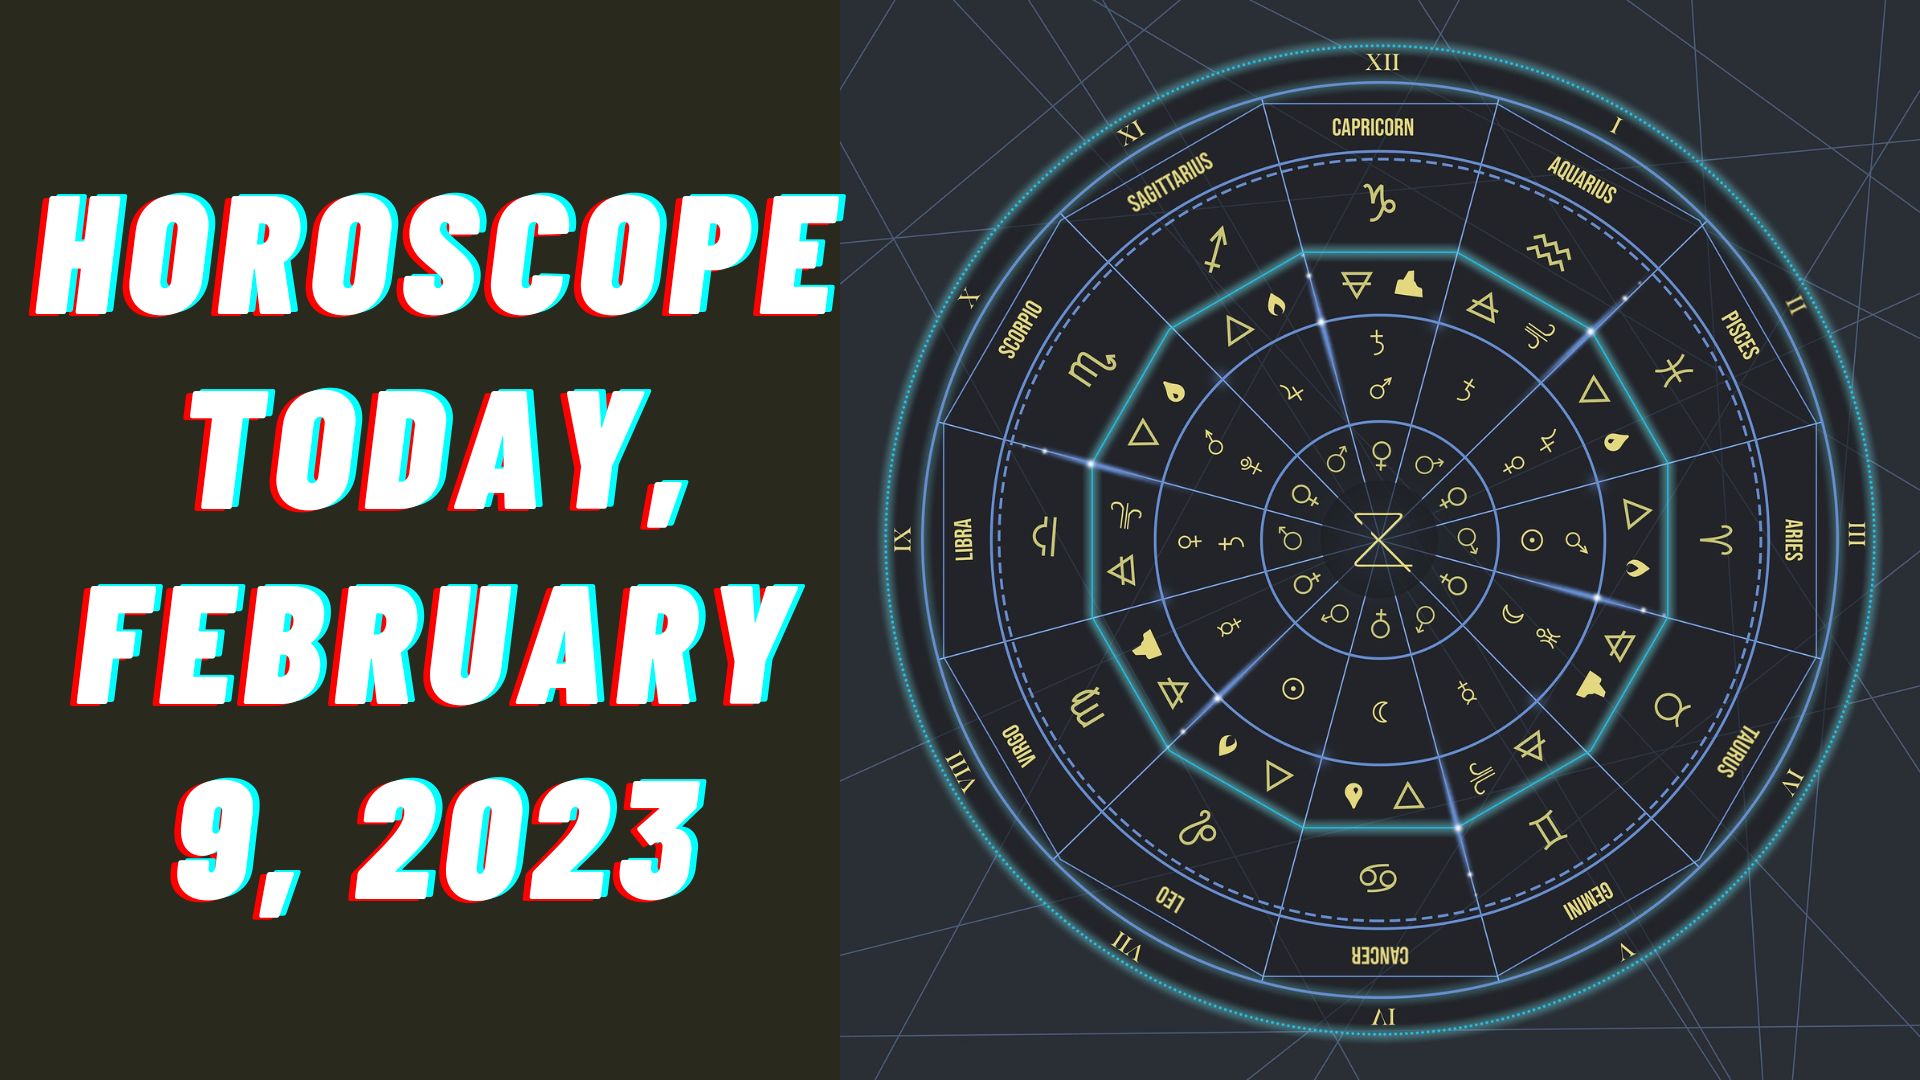 Horoscope Today, February 9, 2023 - Check Here Astrological Prediction For All Zodiac Signs